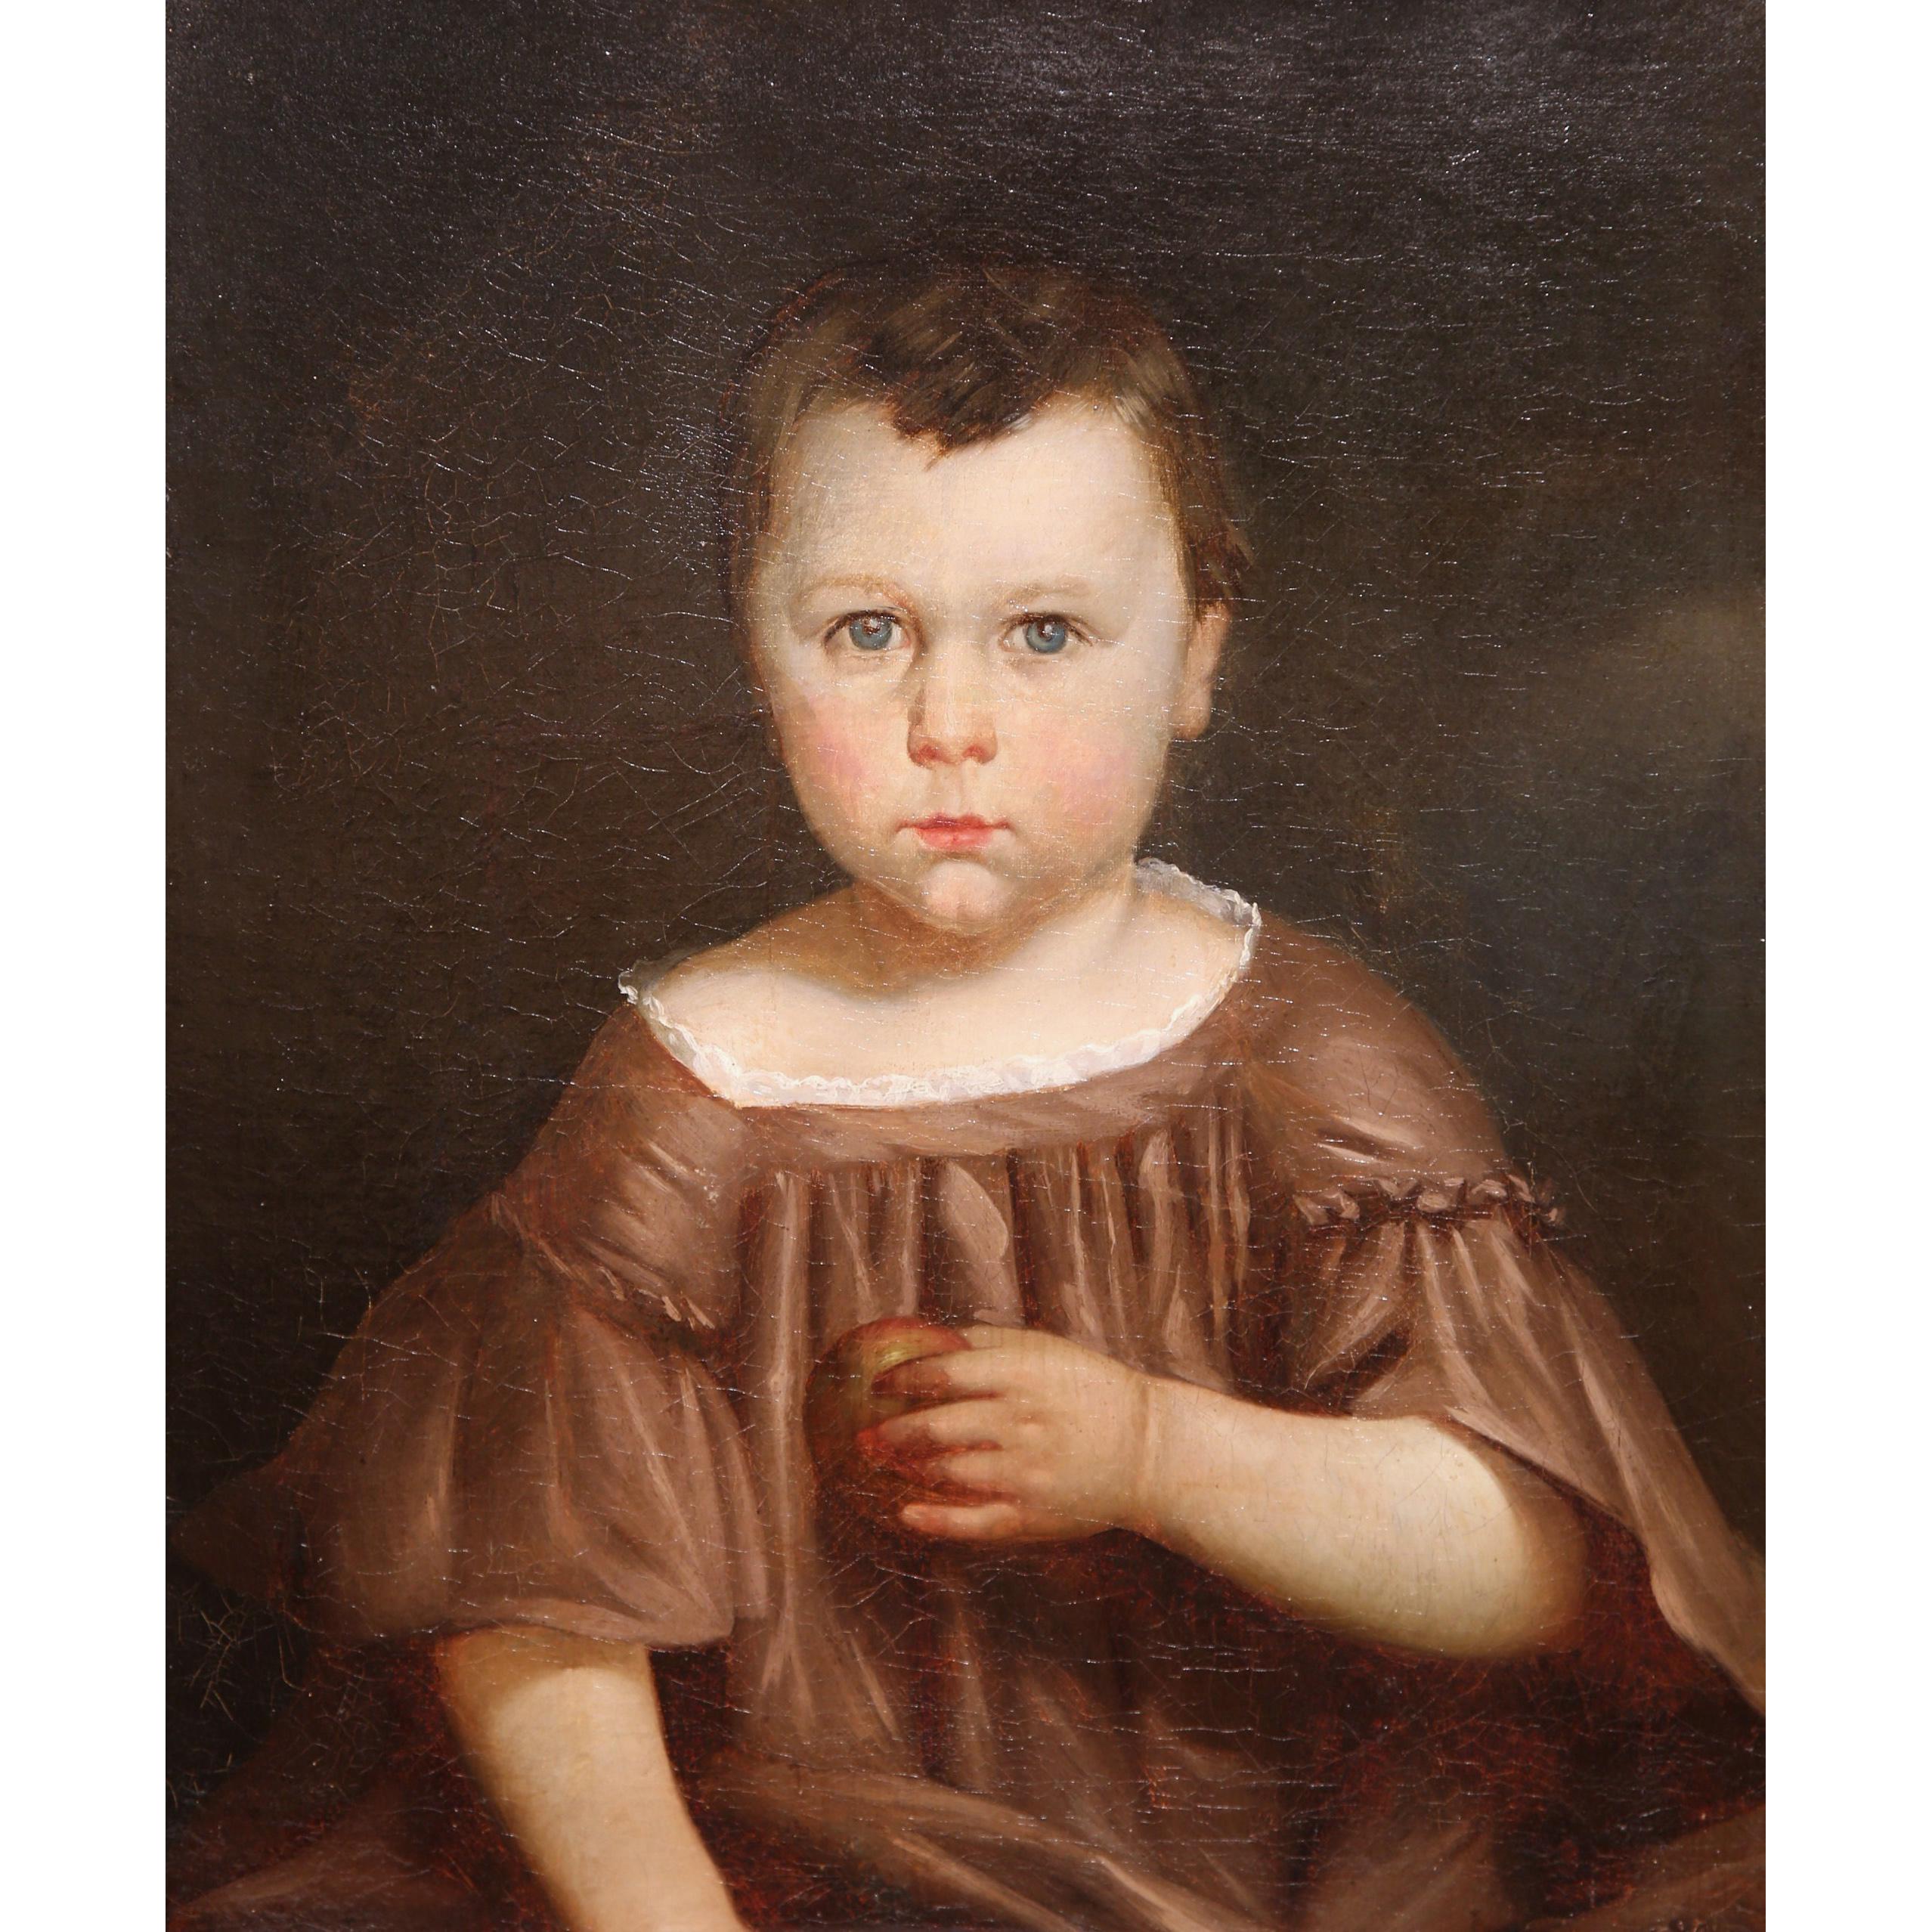 This highly detailed oil on canvas painting was created in France circa 1820. Set in the original carved gilt frame, the portrait features a young boy in traditional clothing holding an apple in his left hand. The figure has a strong, piercing gaze